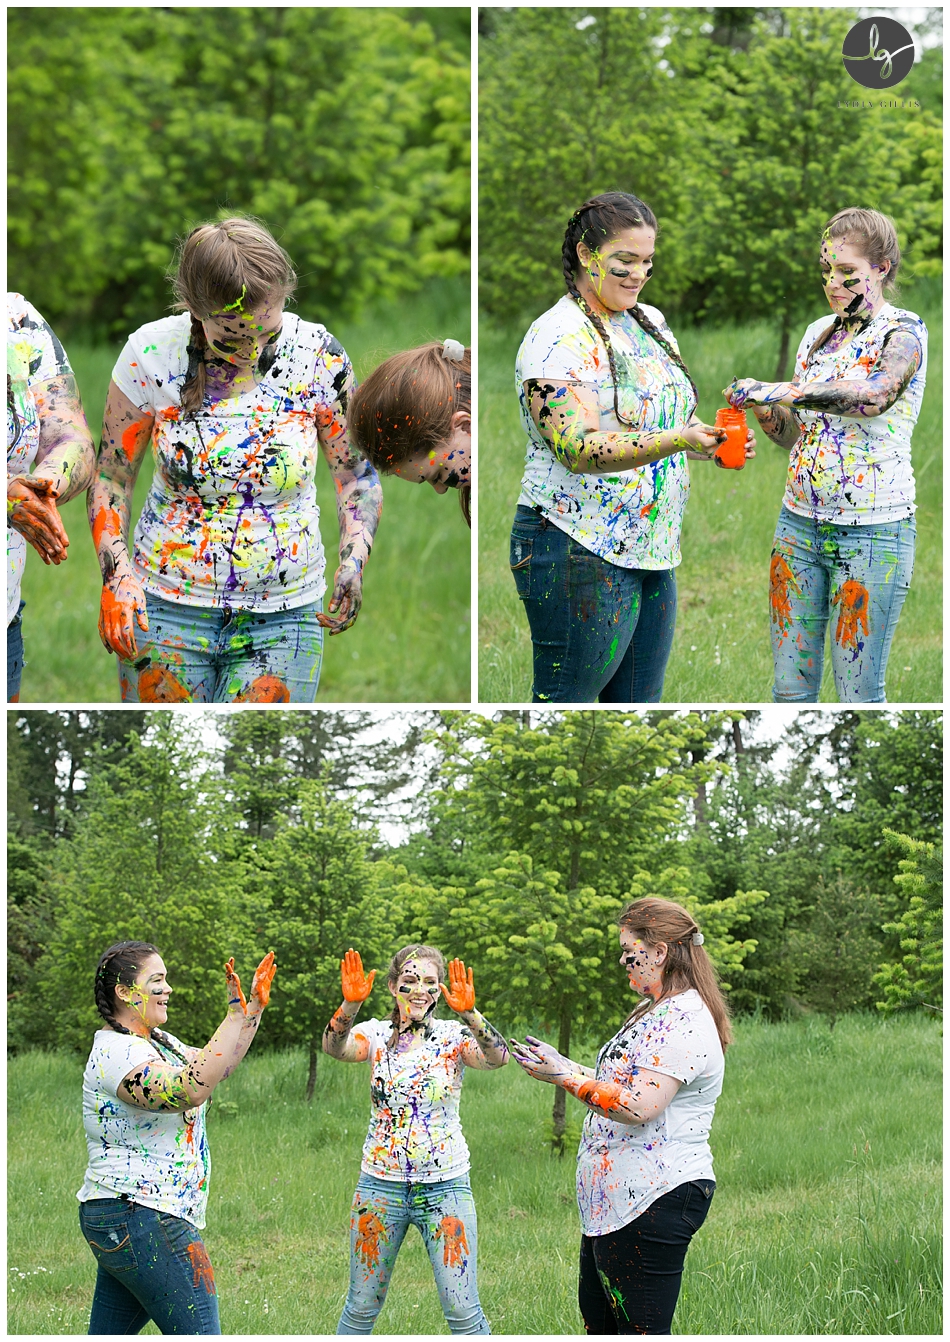 Paint fight photos in Eugene